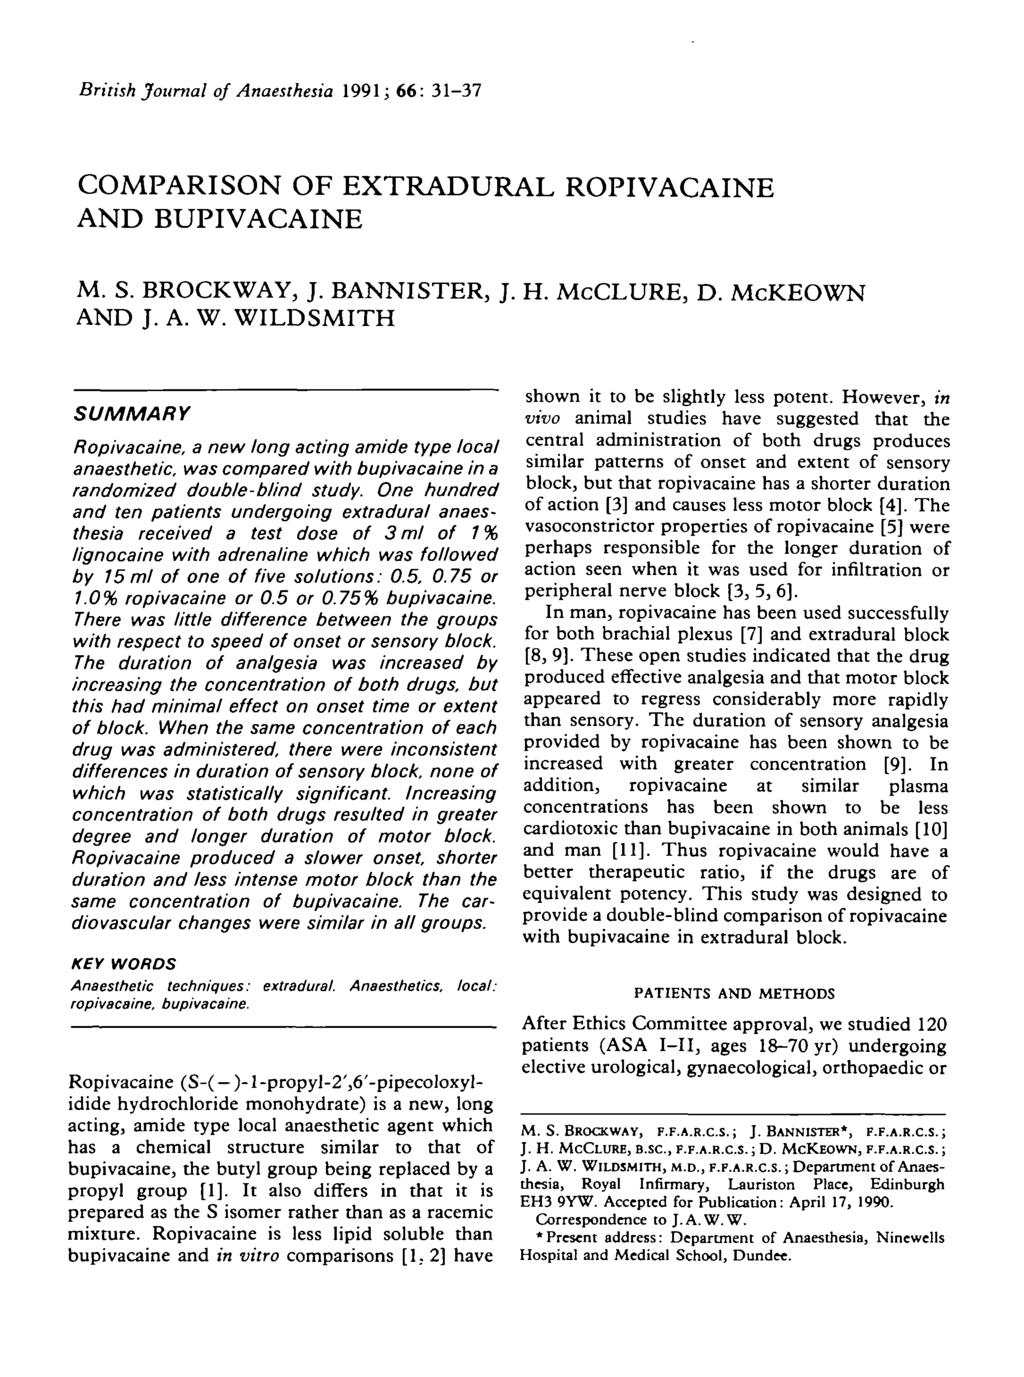 British Journal of Anaesthesia 99; : -7 COMPARISON OF EXTRADURAL ROPIVACAINE AND BUPIVACAINE M. S. BROCKWAY, J. BANNISTER, J. H. McCLURE, D. McKEOWN AND J. A. W.